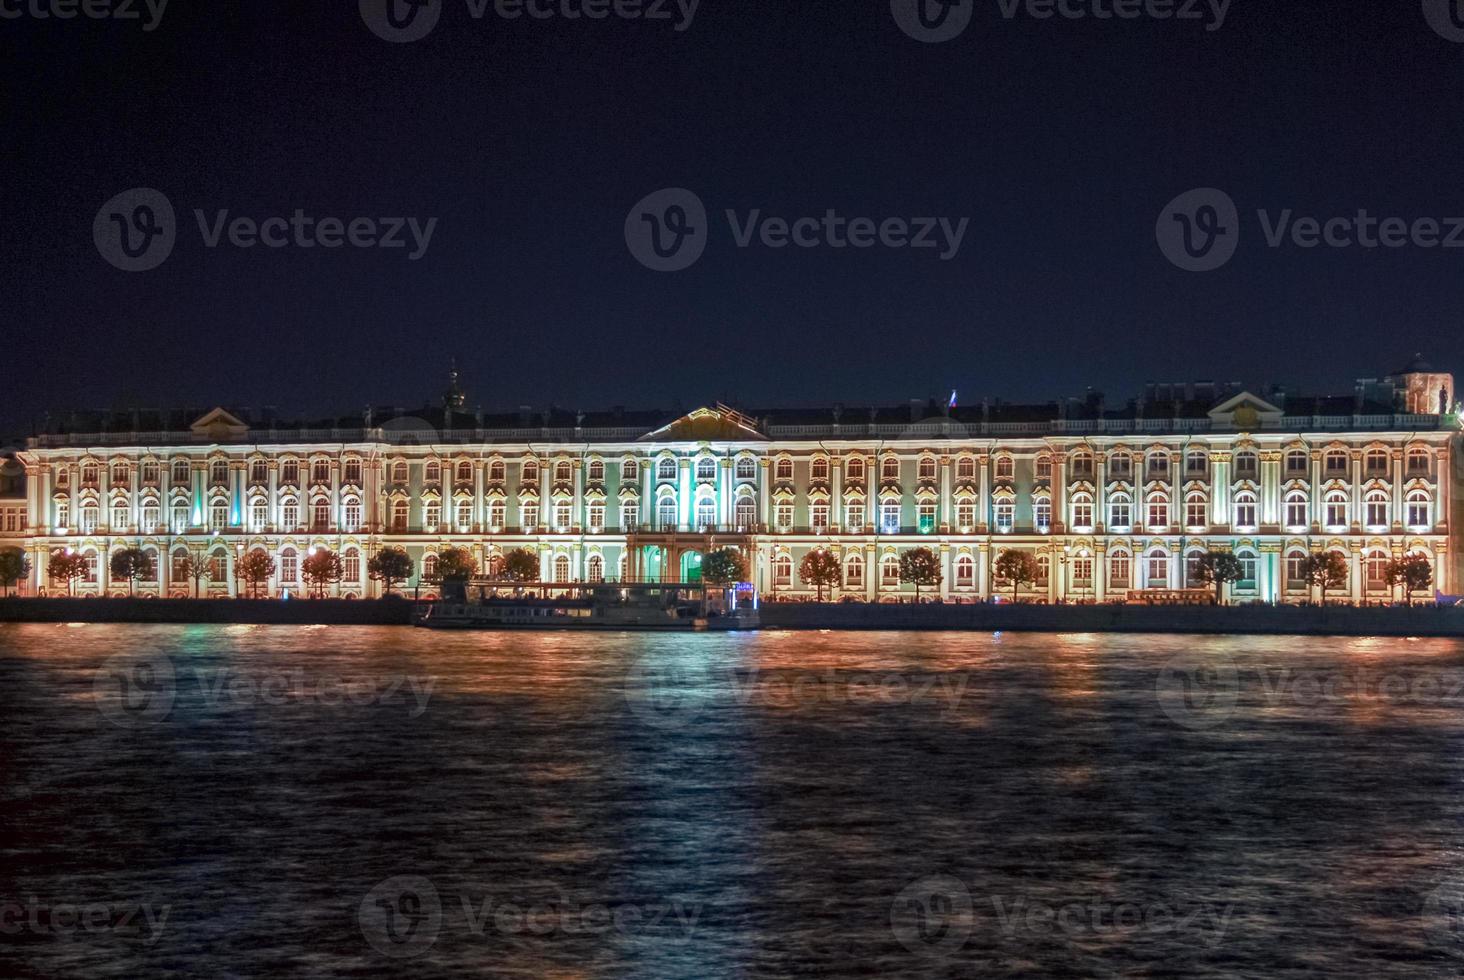 Winter Palace from the Neva River in Saint Petersburg, Russia at night photo